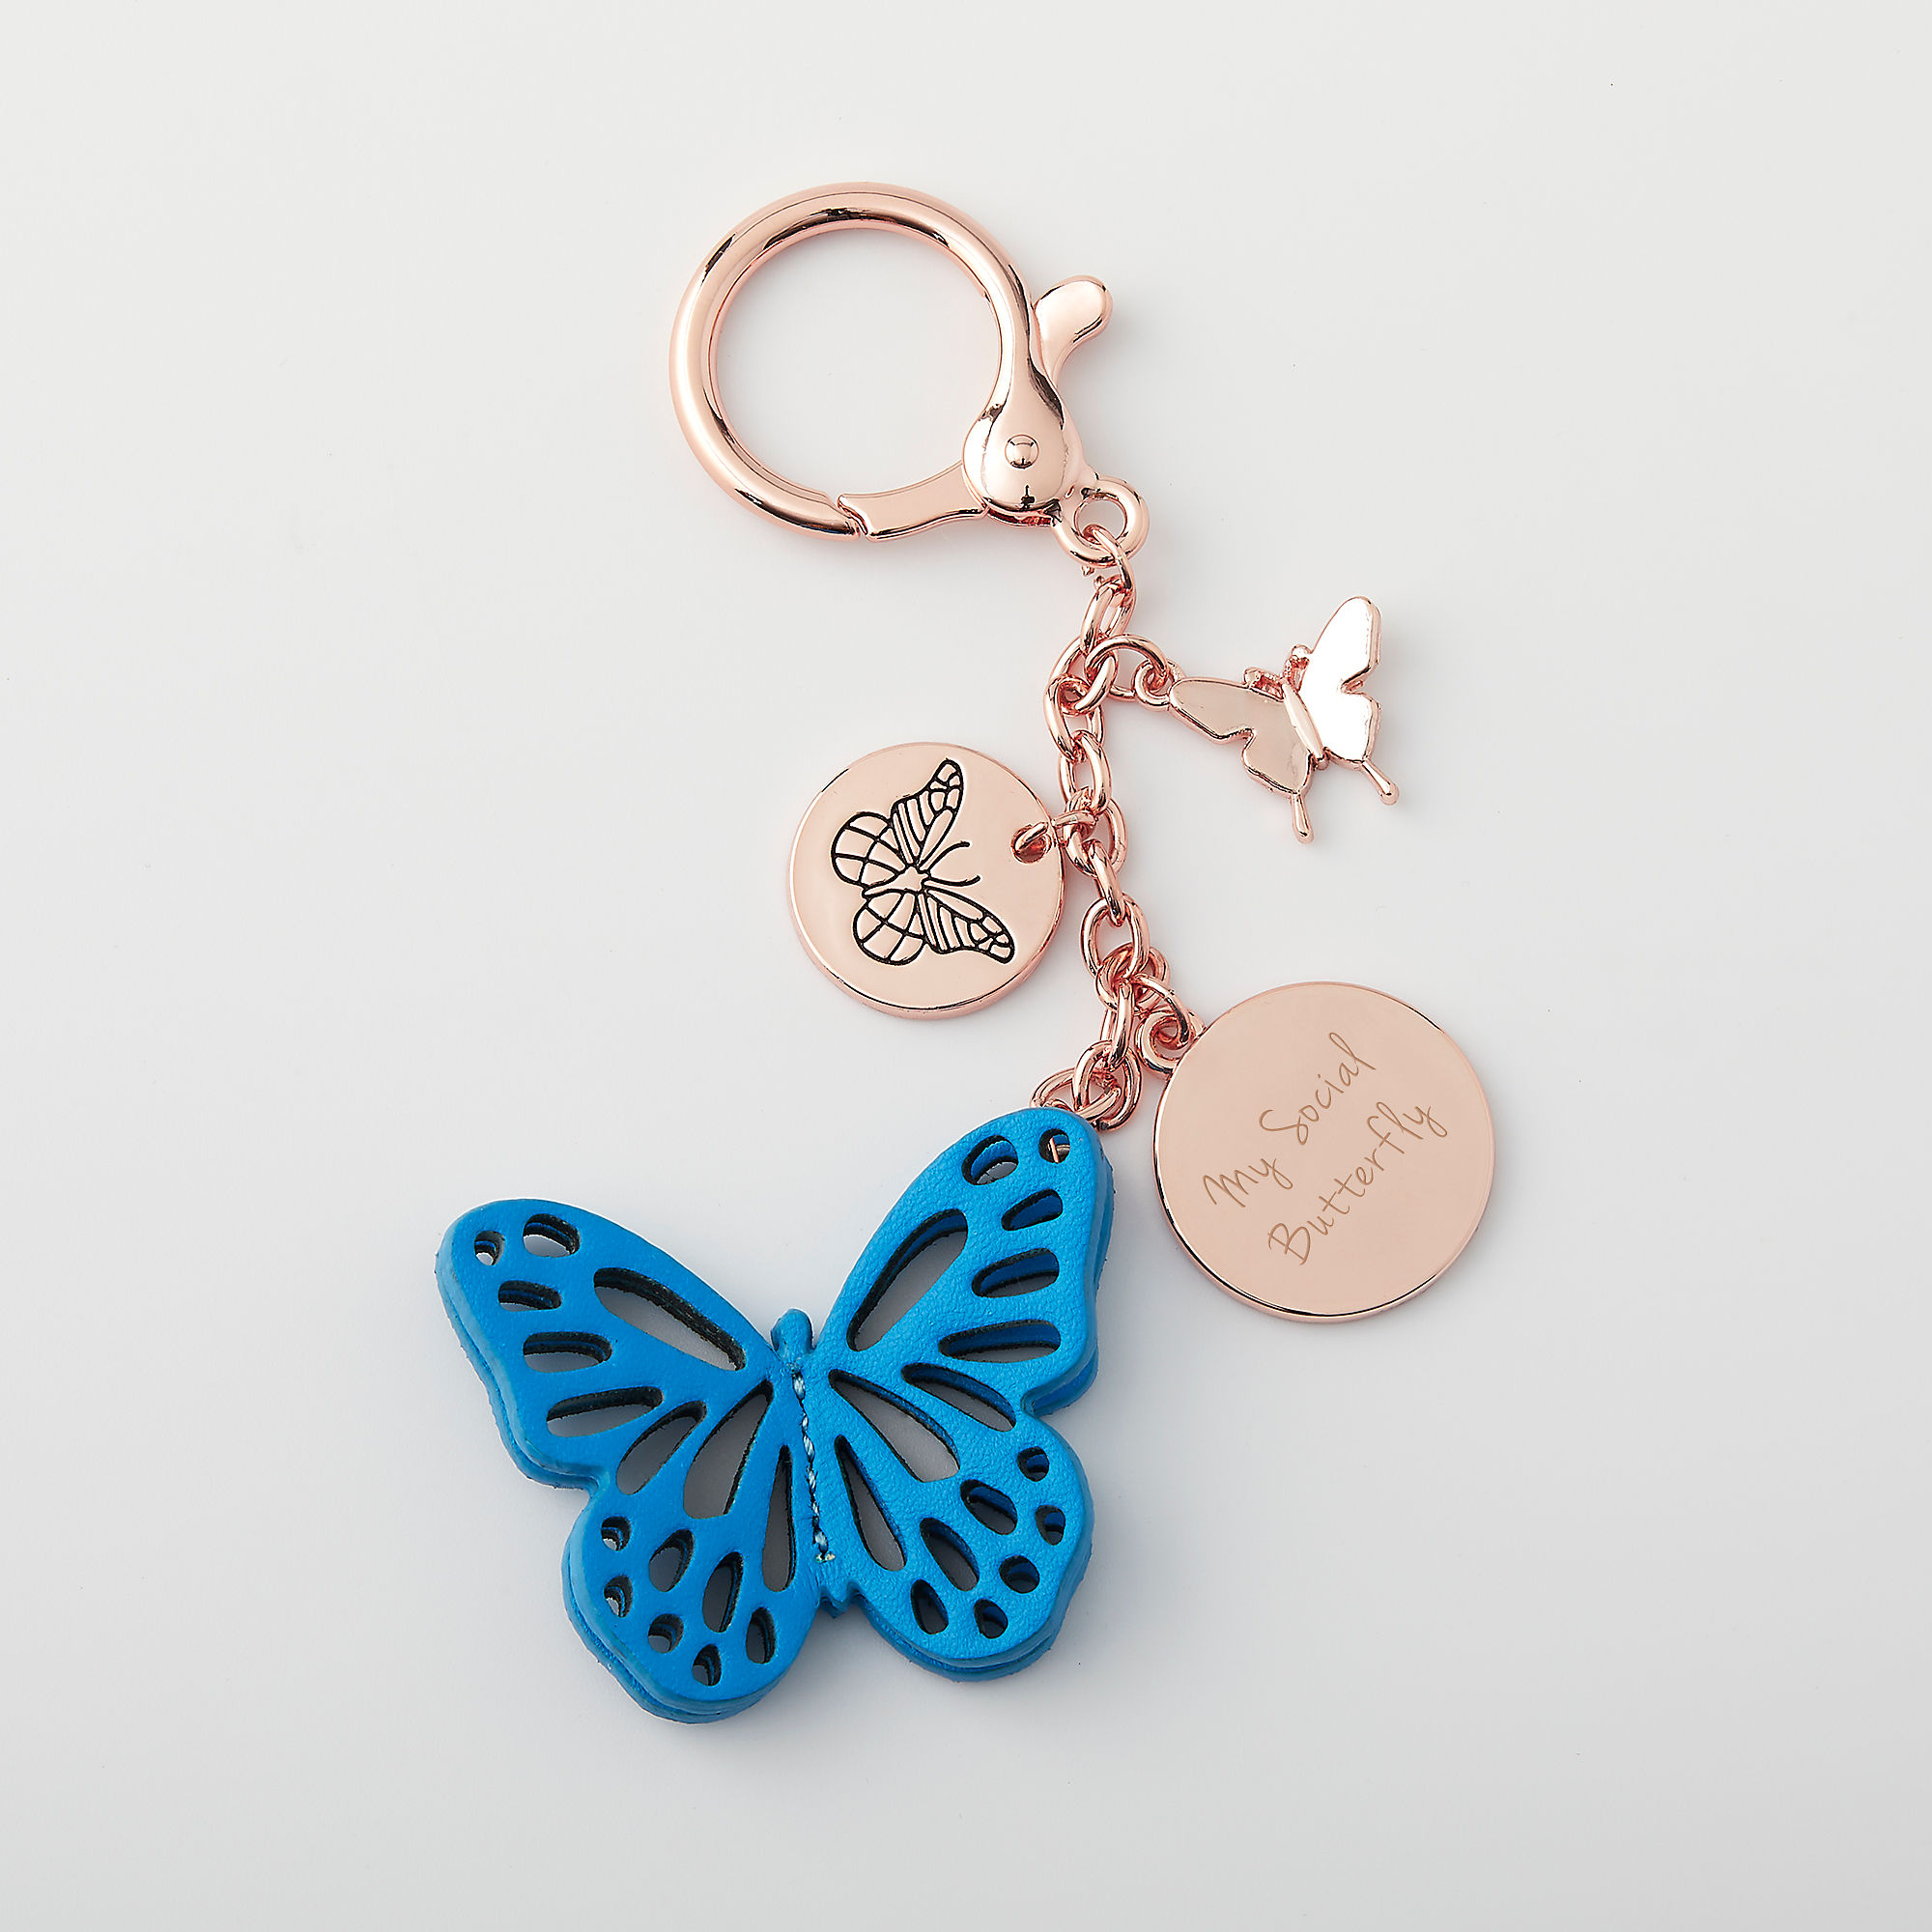 Personalised Silver Rhinestone Butterfly & Letter/Initial Charm Keyring Gift 